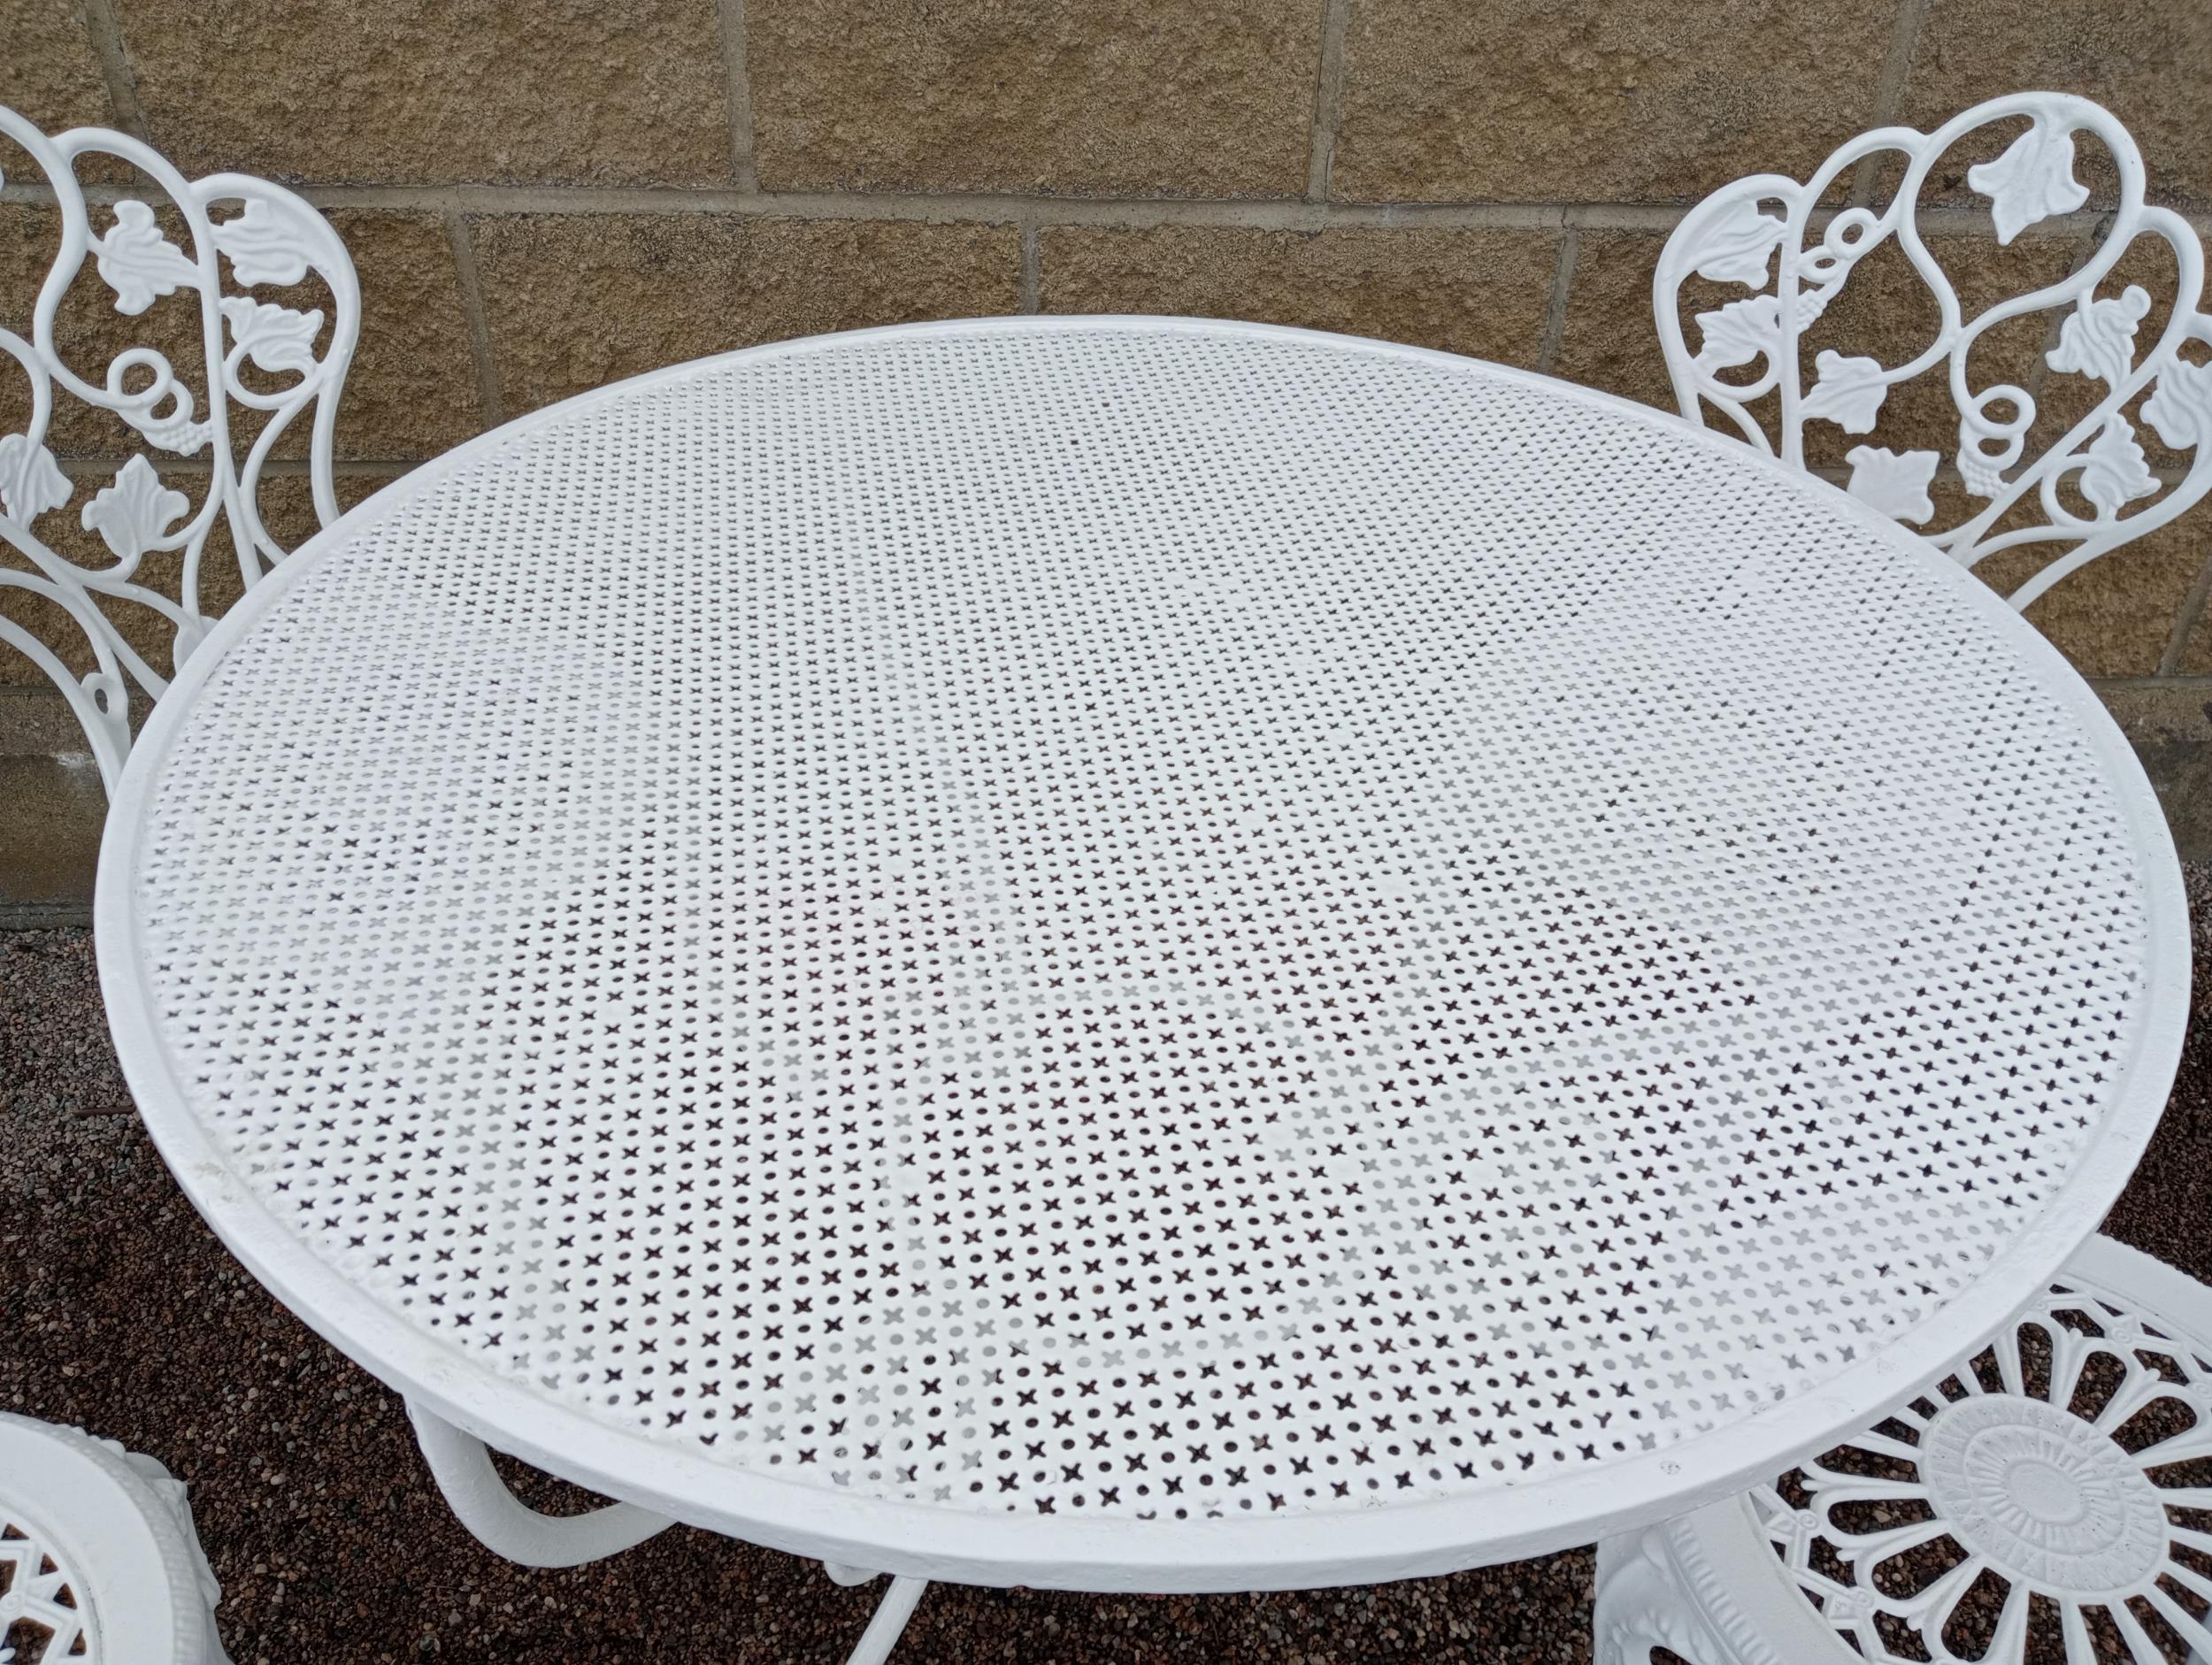 Aluminium garden table and four chairs {Chairs H 84cm x 40 x 40 Table H 72cm x Dia 92cm }. (NOT - Image 2 of 3